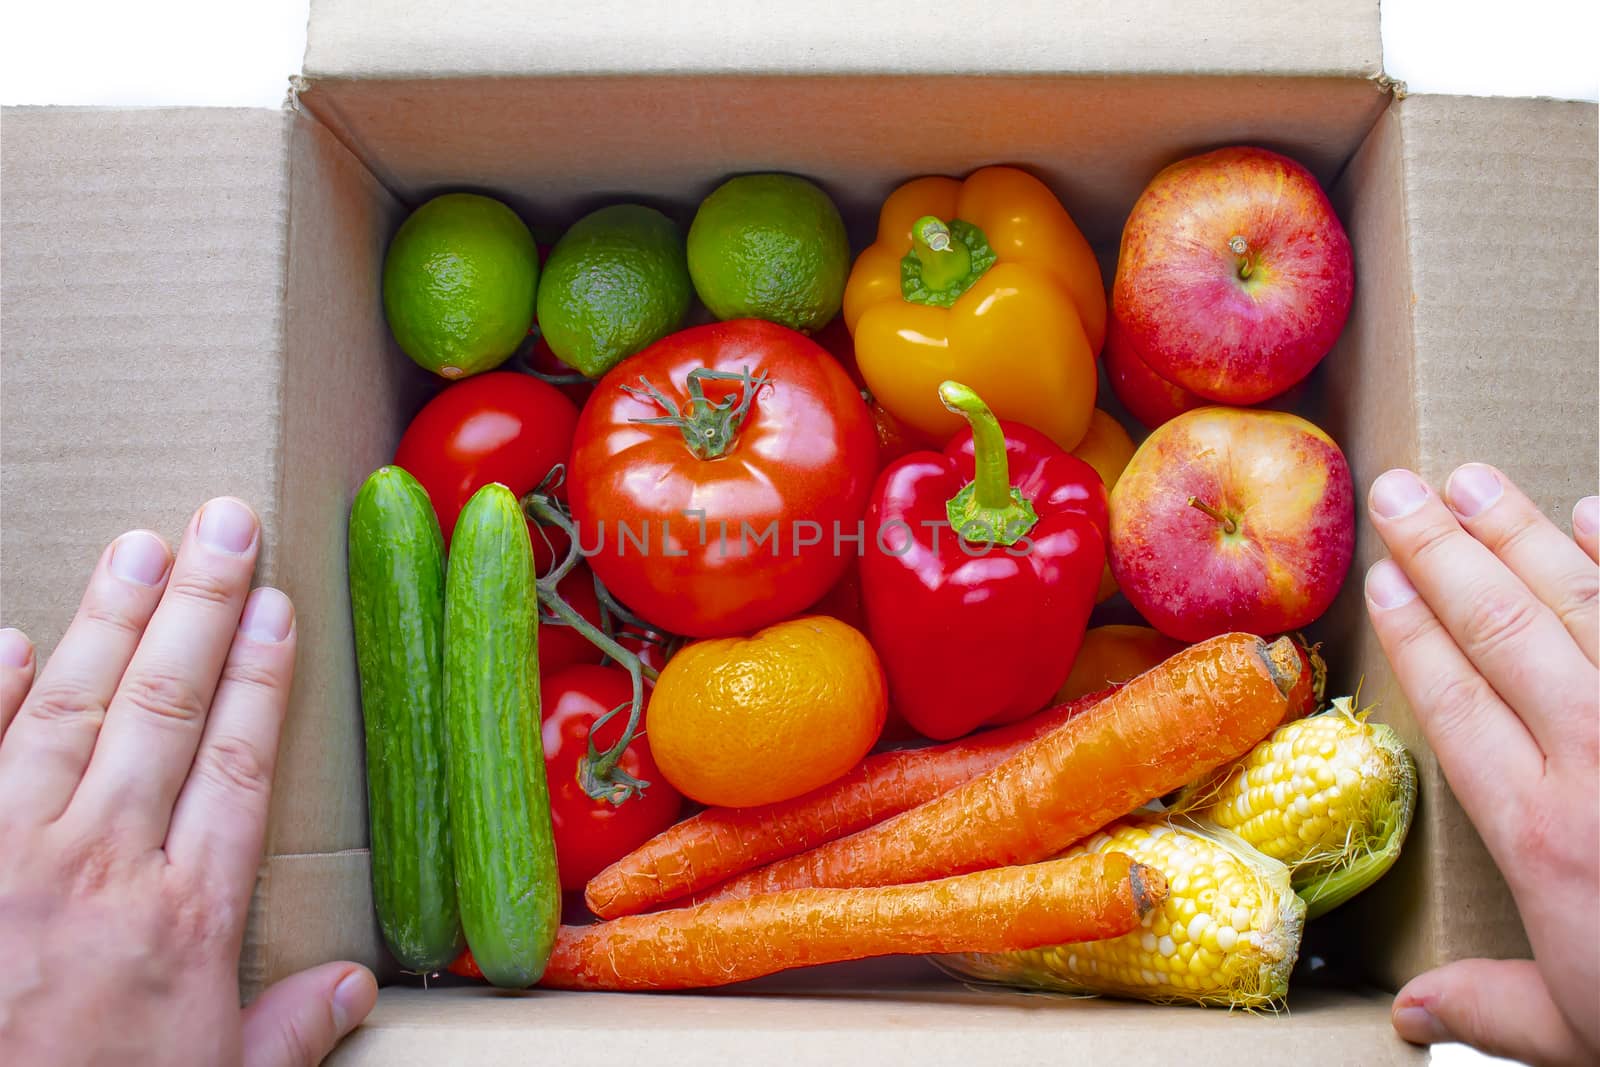 A person opening a deliver cardboard box with produce, fruits and vegetables inside on a white background